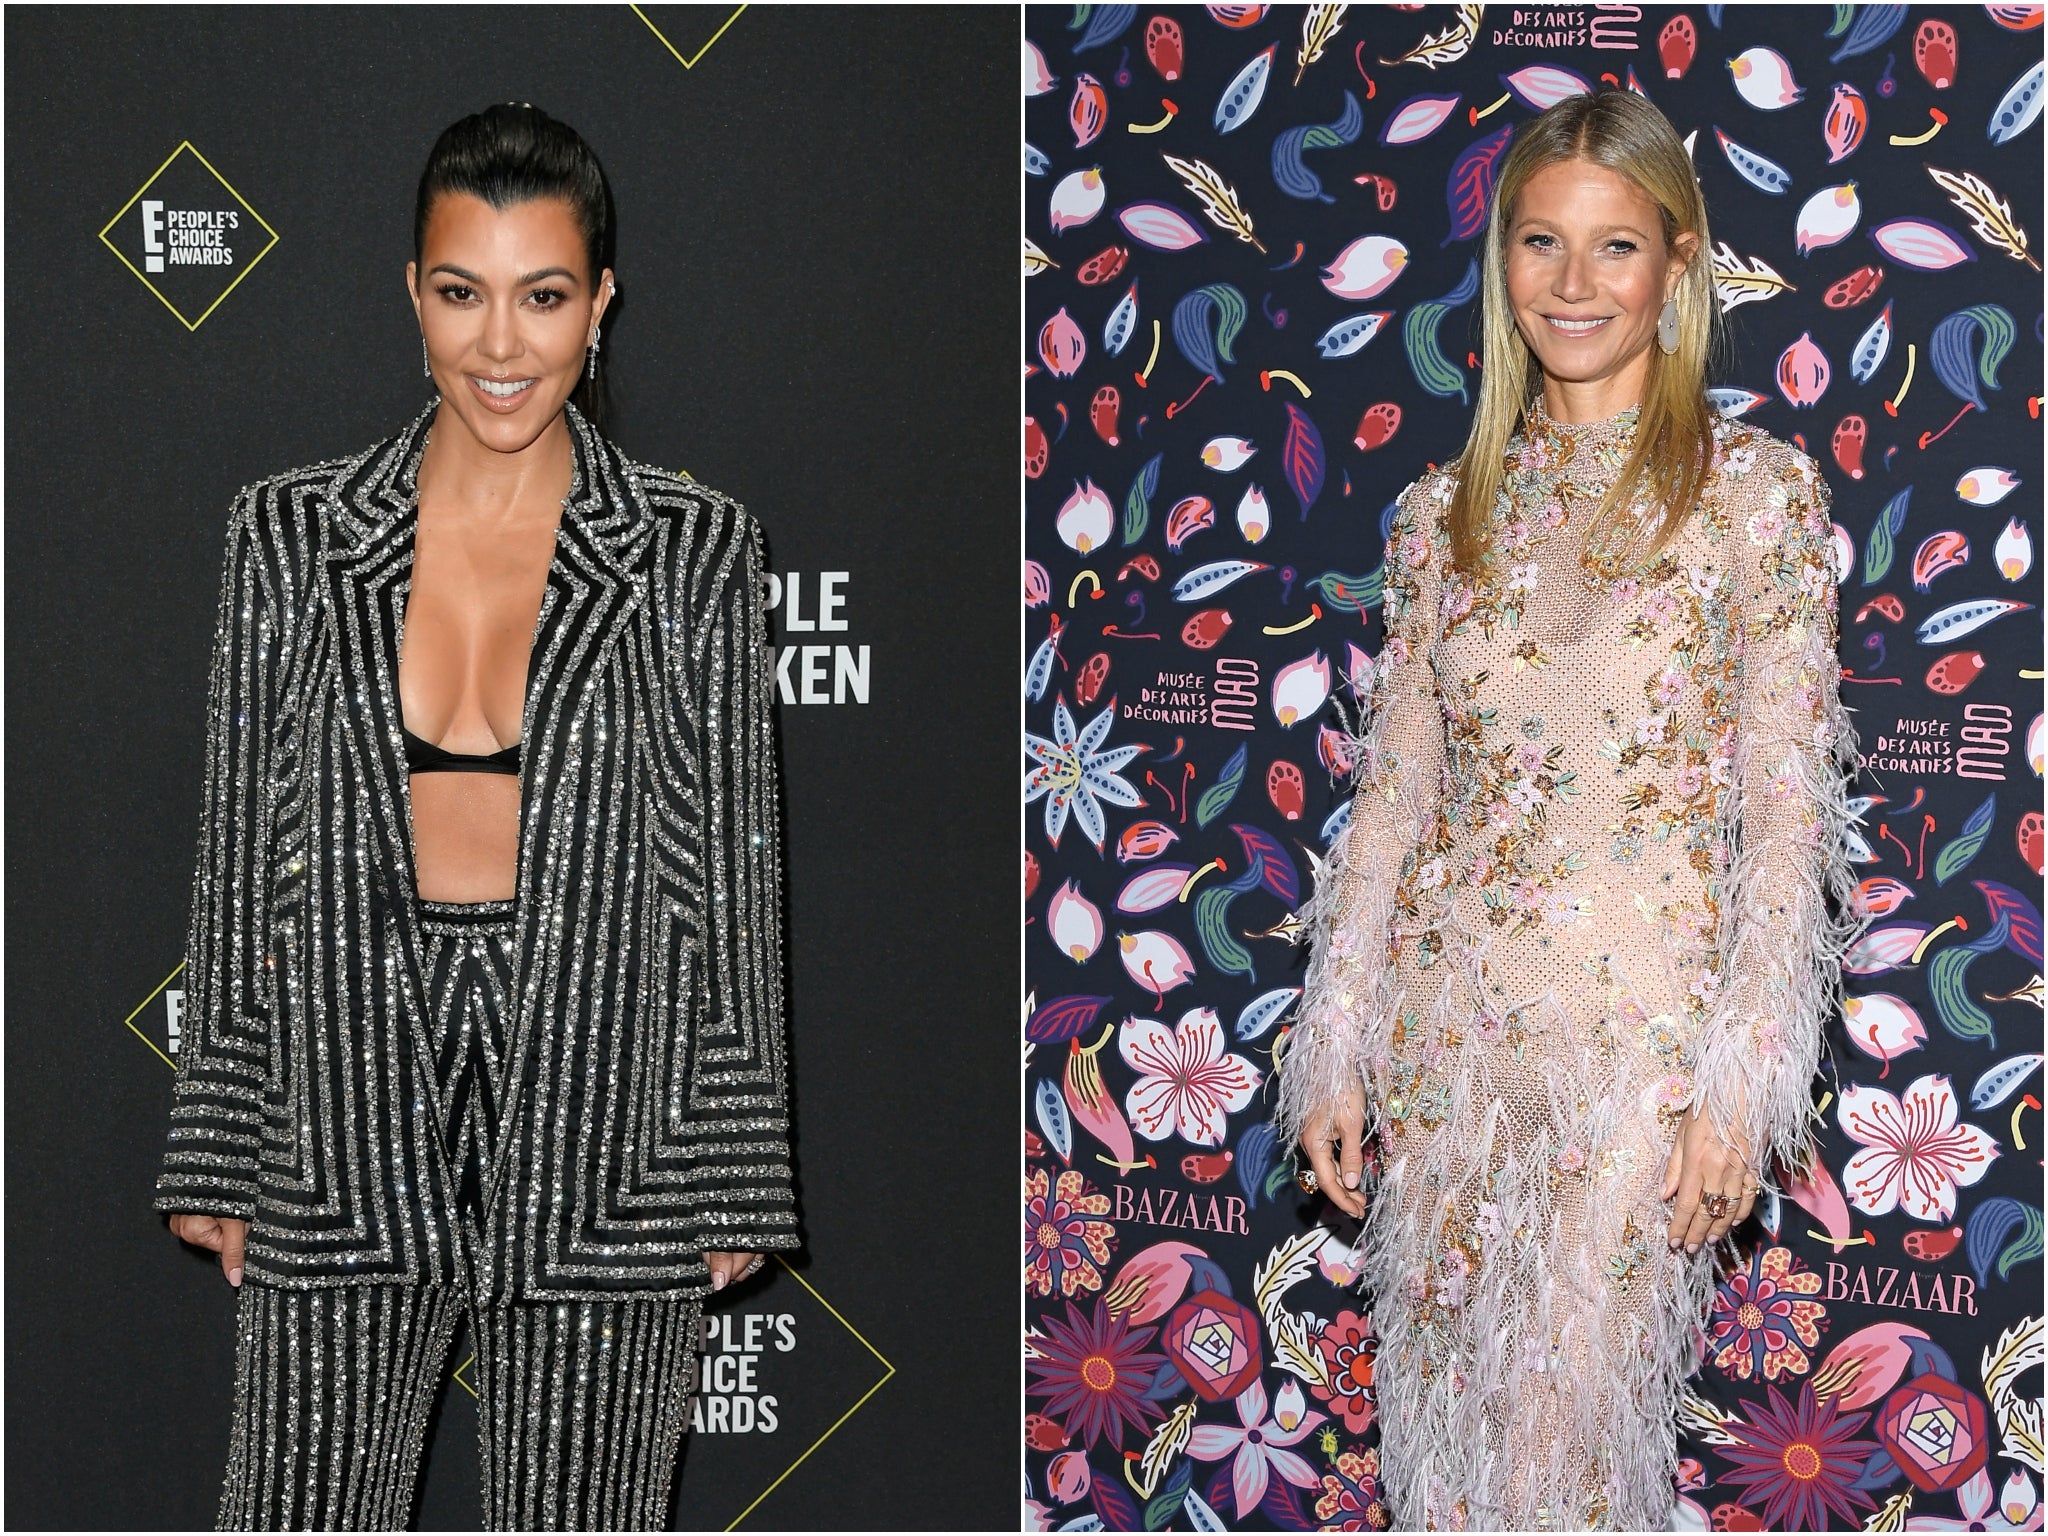 Kourtney Kardashian (L) and Gwyneth Paltrow’s lifestyle brands are launching a collaboration